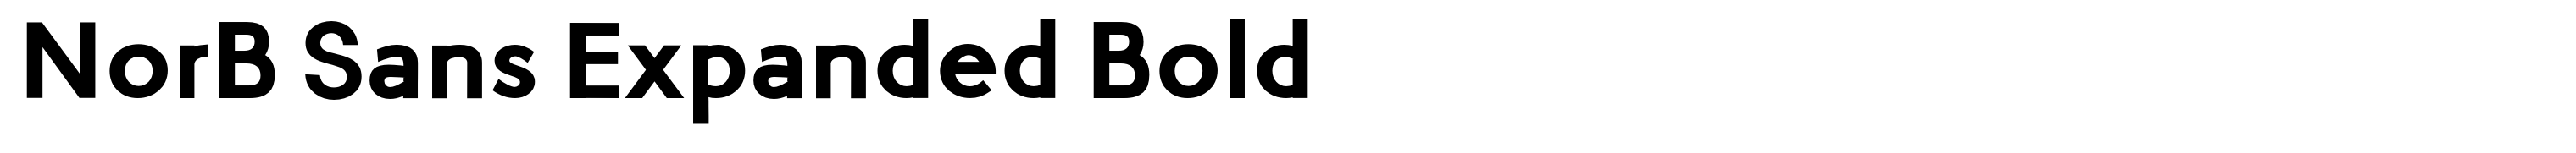 NorB Sans Expanded Bold